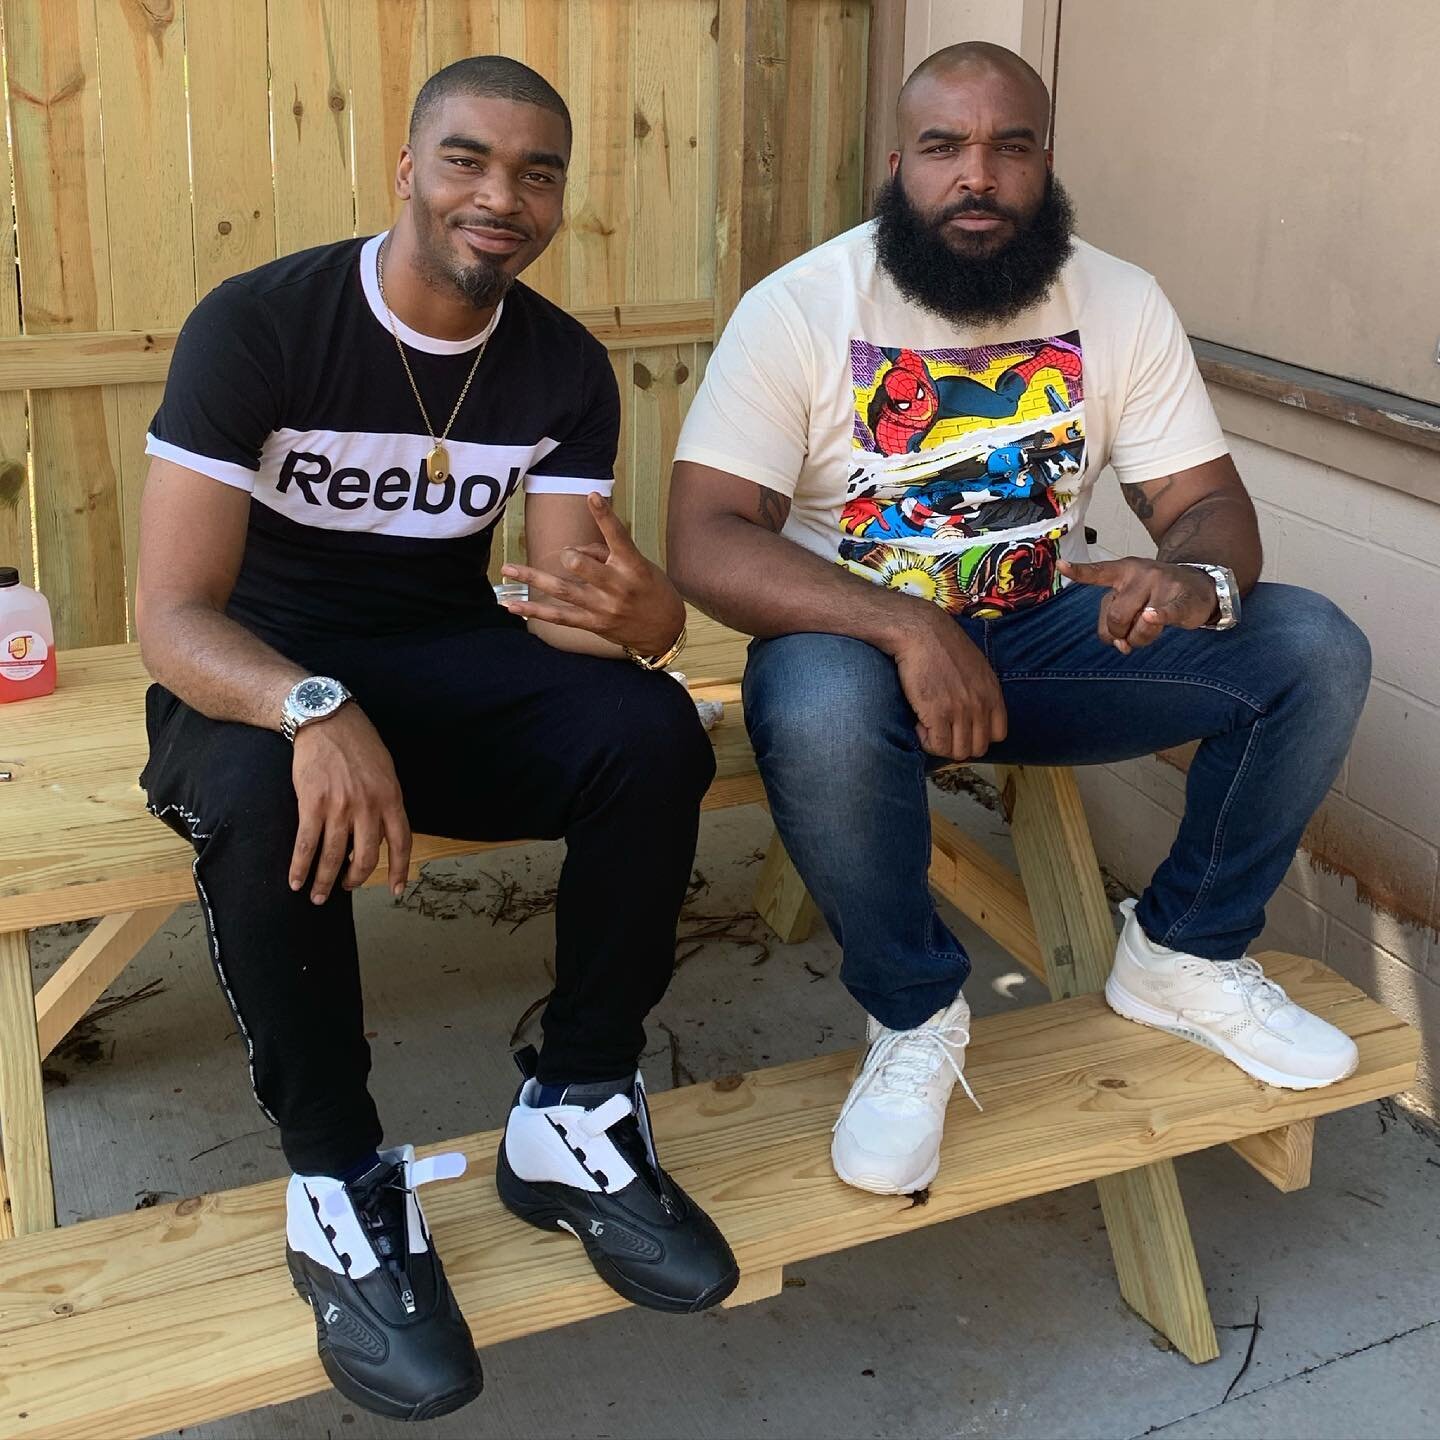 My Reebok brother from another mother, Bone fell thru the city!  New Music on the way! S/O to the good people at Back Deck BBQ too‼️💪🏾💪🏾💪🏾 #CoreDJs #TX2KY #KYRaised #TheELITEgiance #Louisville #KY #teamreebok1895 #Reebok #Reebok #Iverson #venti